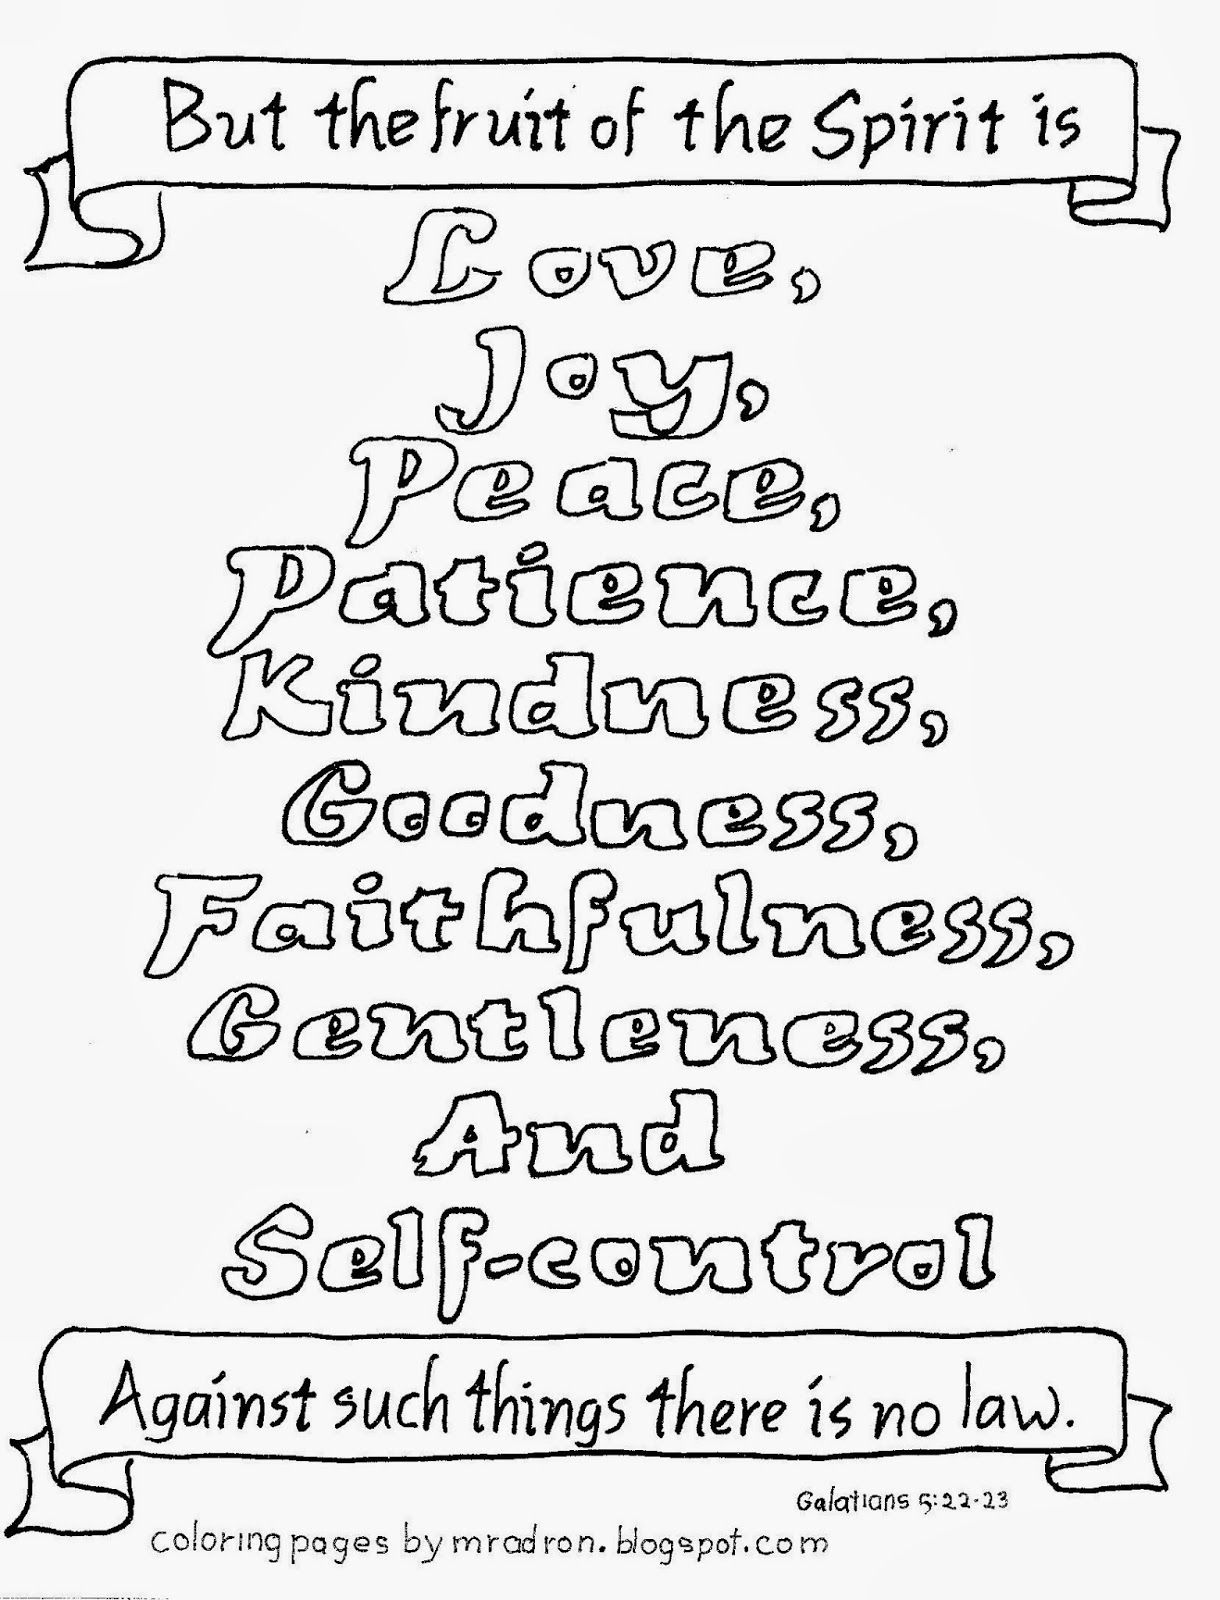 Coloring Pages for Kids by Mr. Adron: Free Fruit Of The Spirit ...